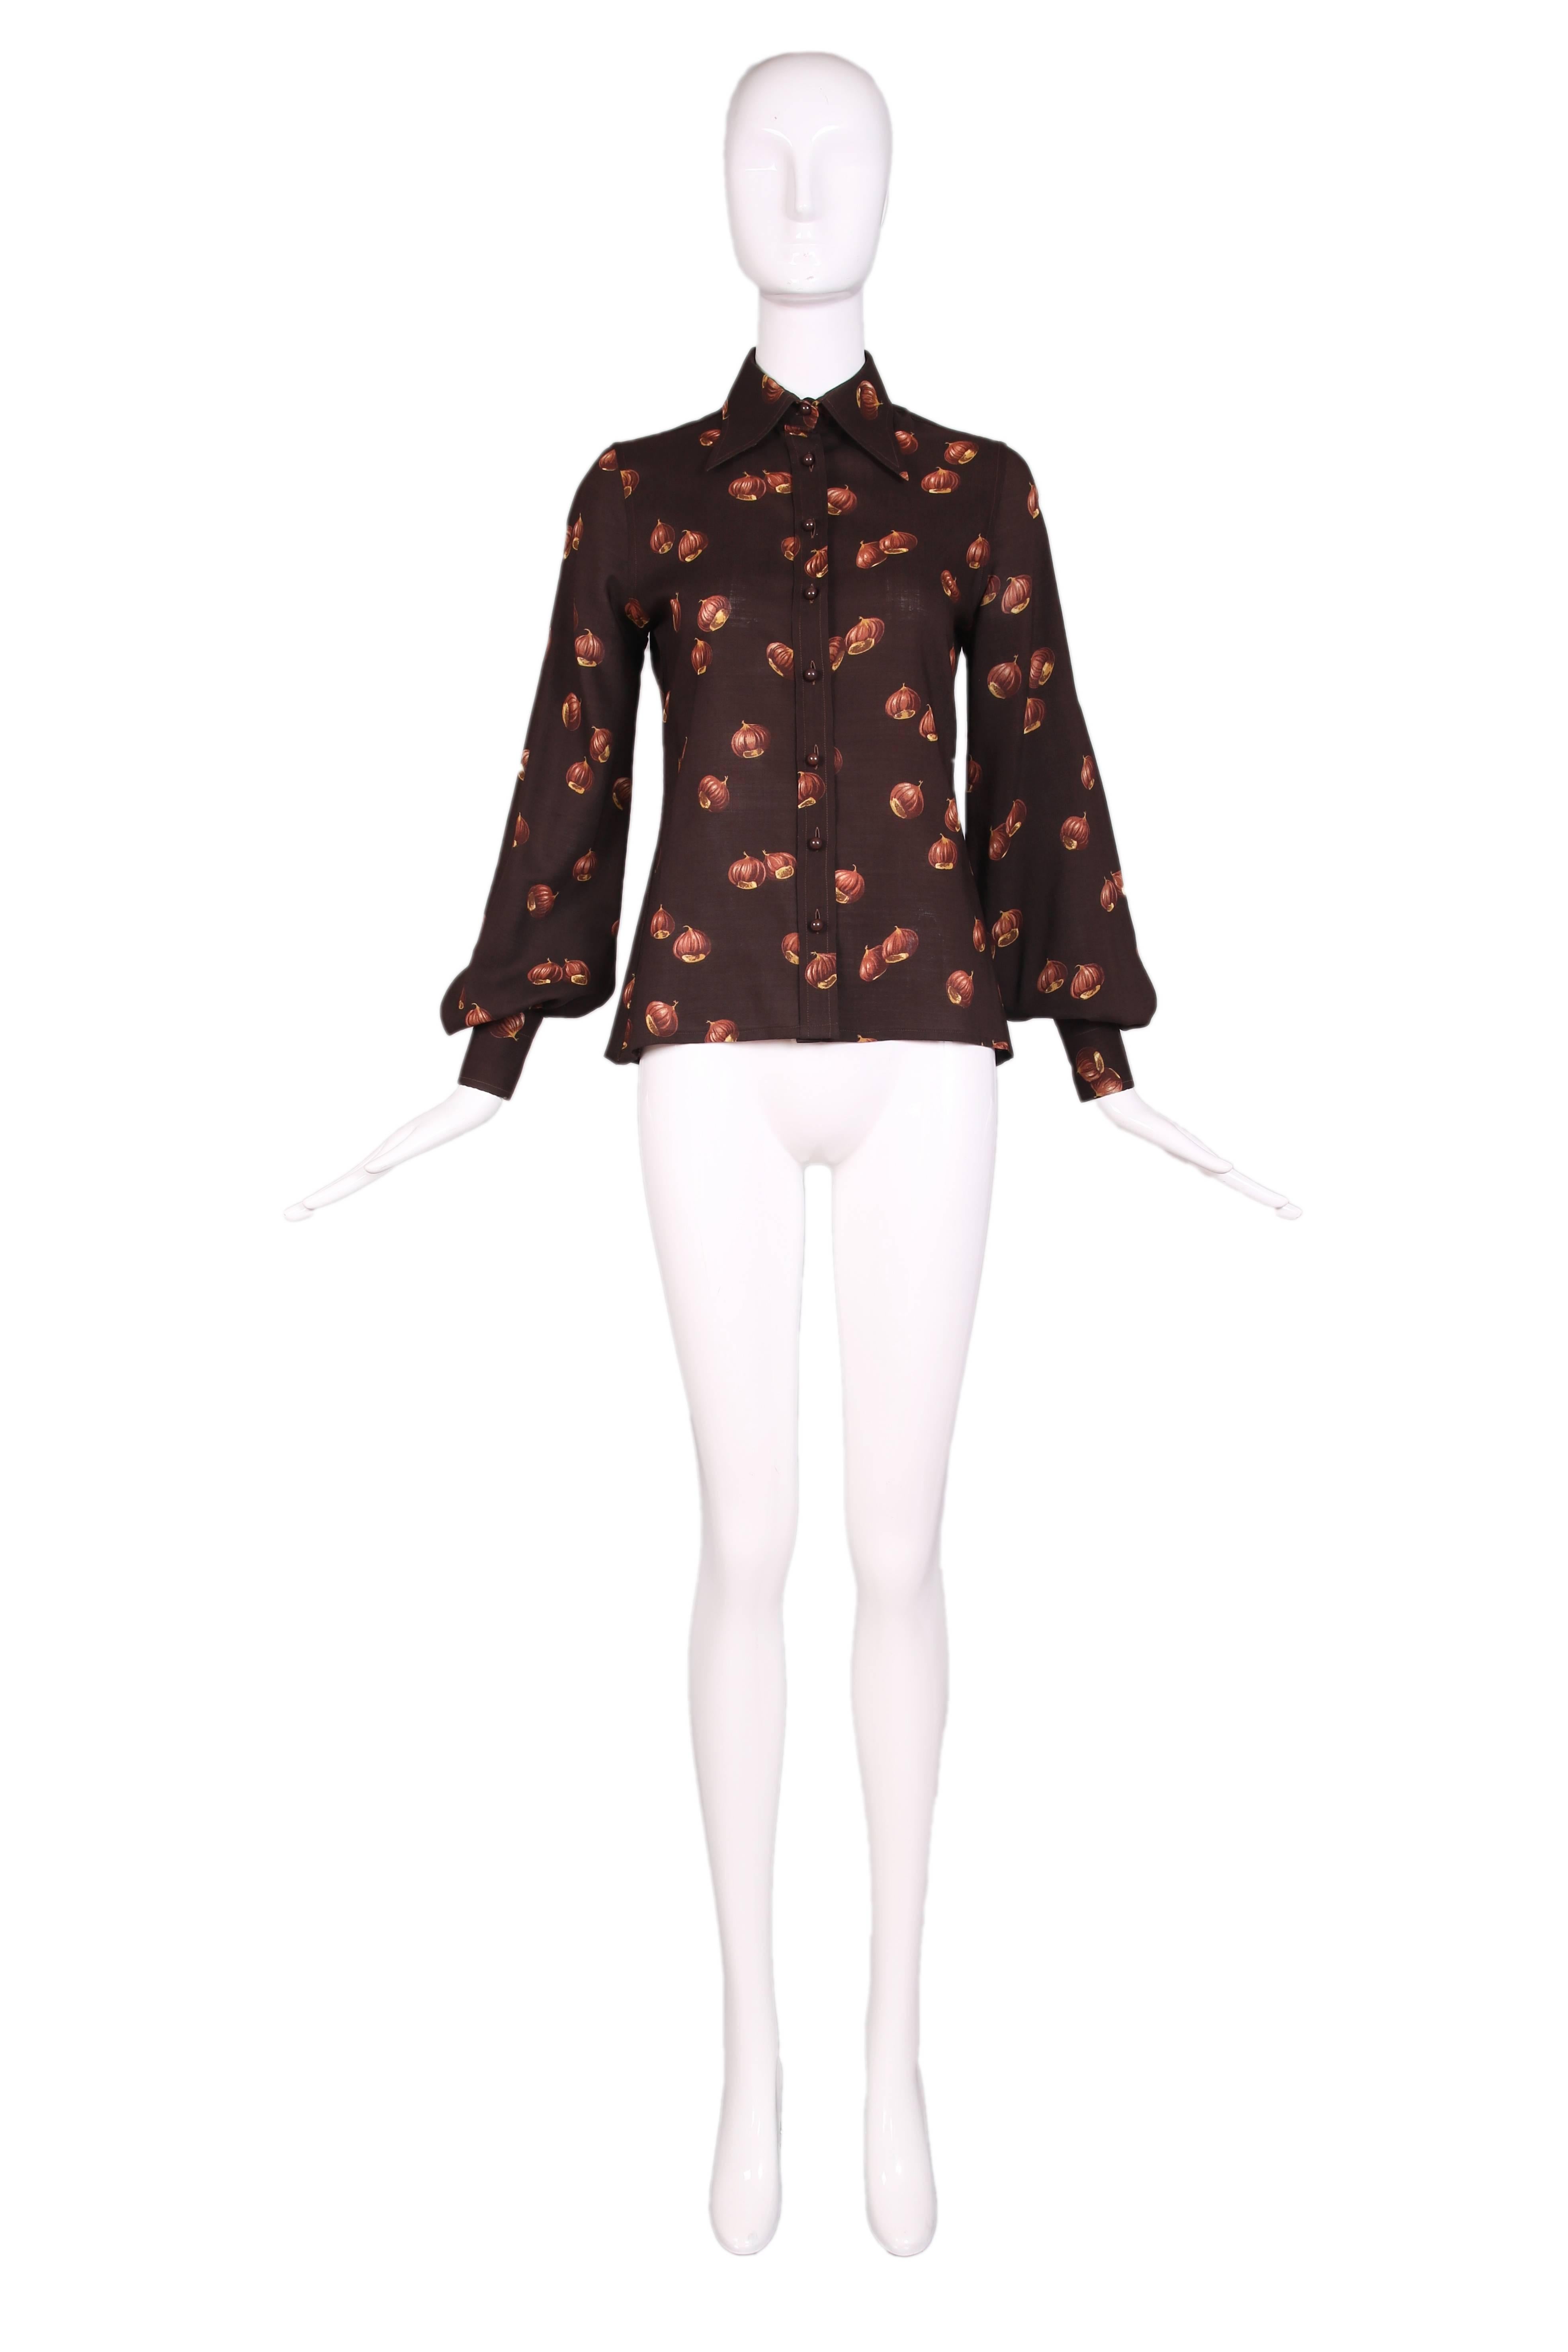 1970's Valentino brown summer wool collared blouse featuring iconic acorn print with and balloon sleeves and fitted cuffs. In excellent condition. 
MEASUREMENTS:
Bust - 35
Waist - 32
Shoulder - 14
Sleeve - 26
Length - 24